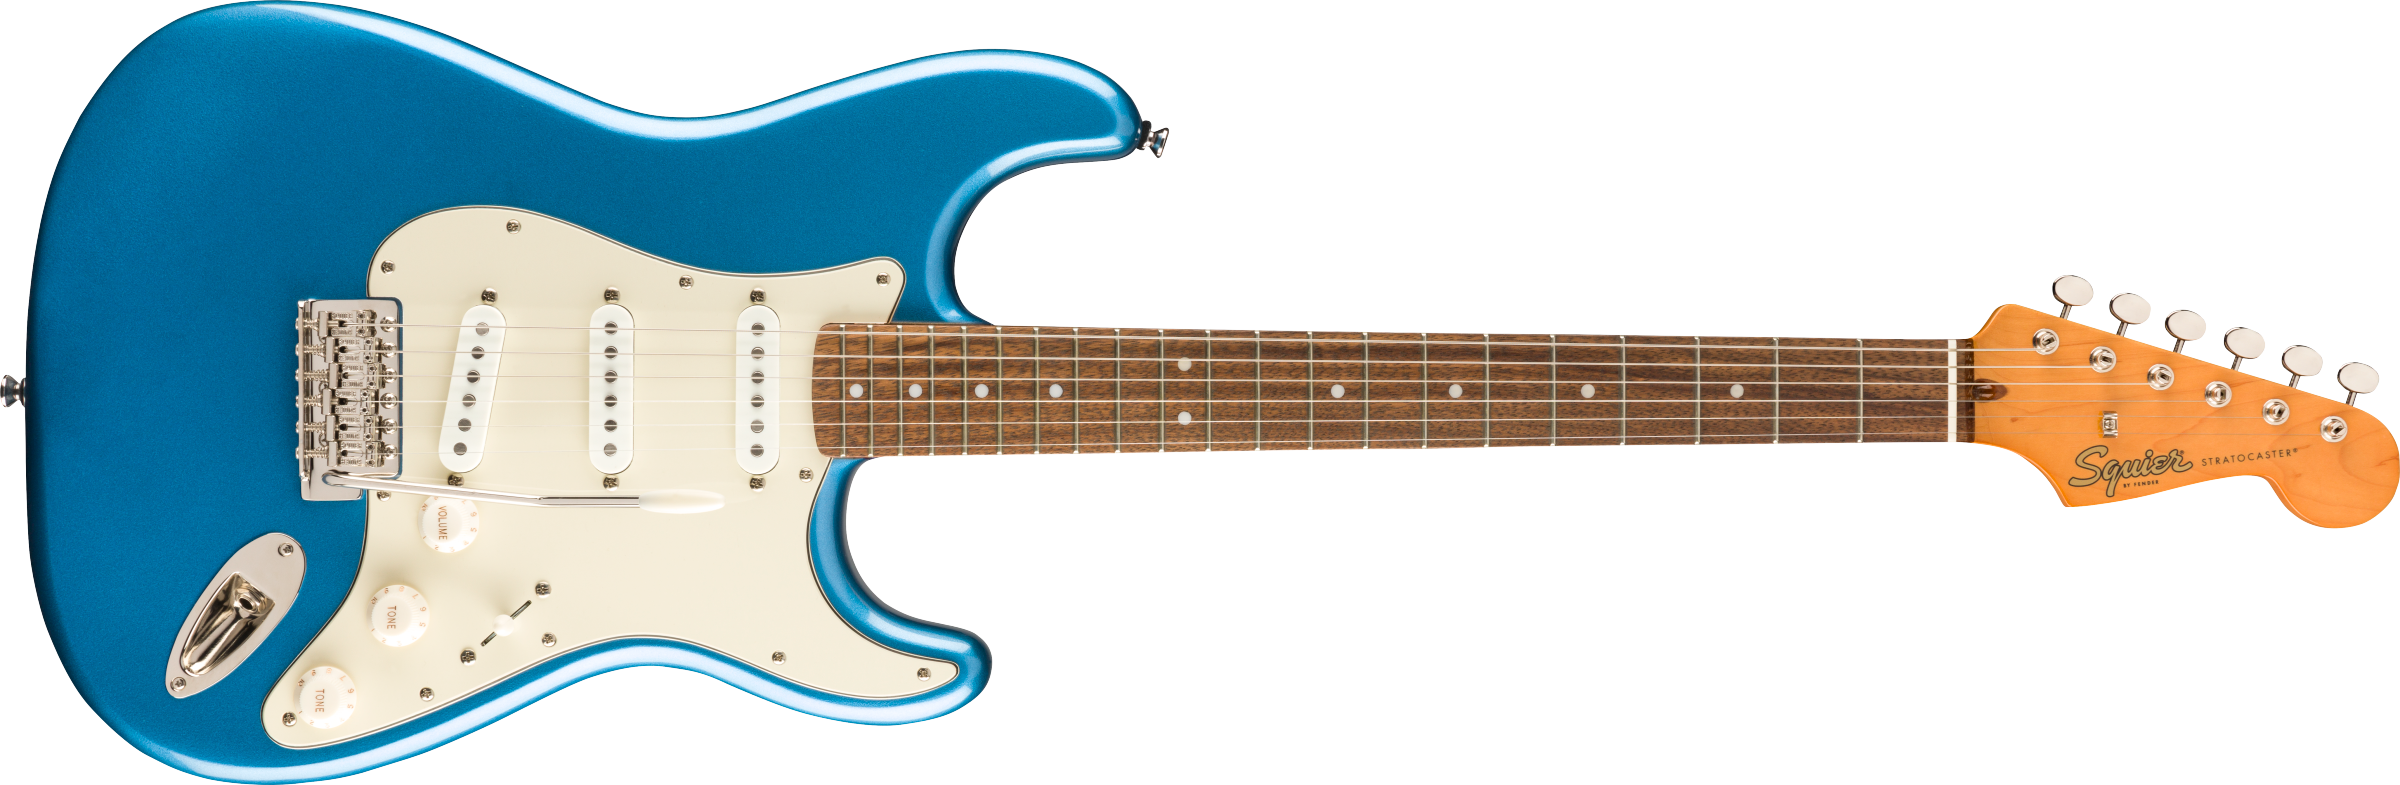 Squier Classic Vibe 60s Stratocaster Lake Placid Blue 0374010502